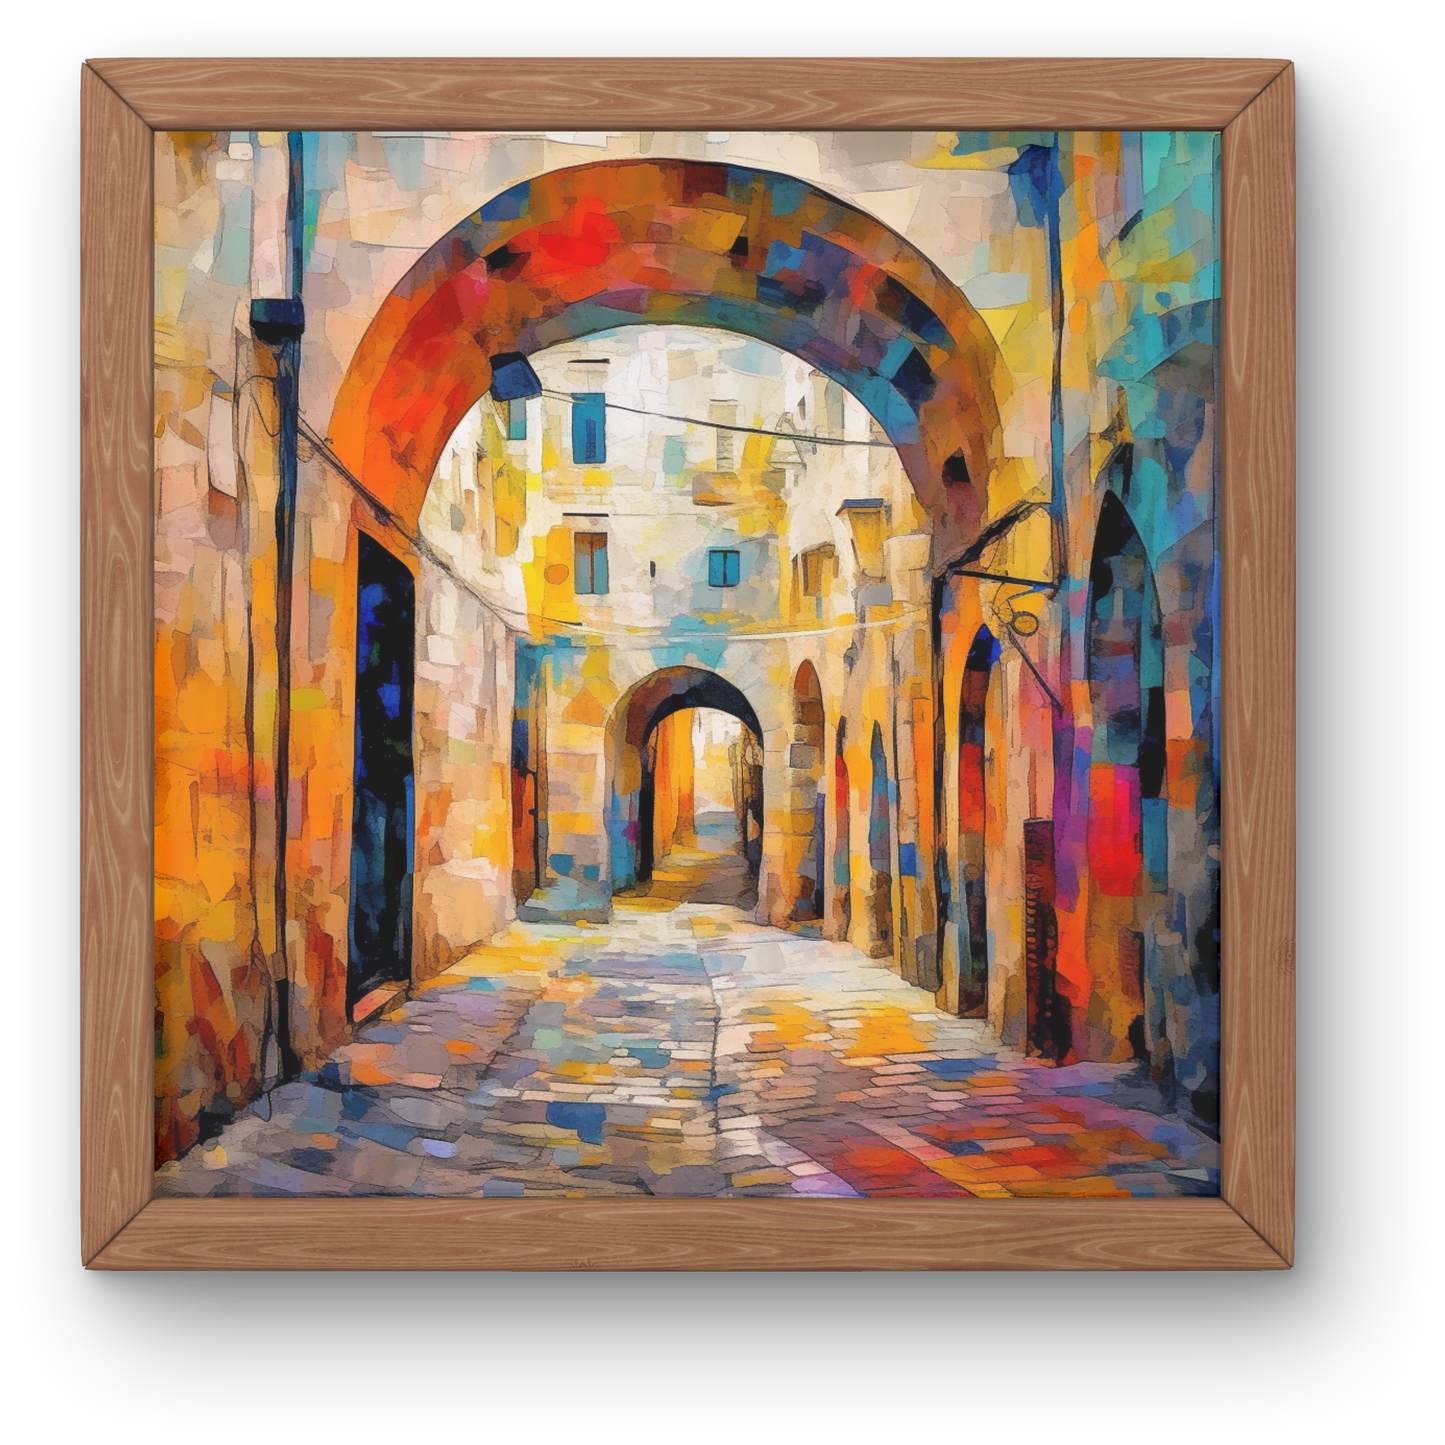 Archways of  the Old City of Jerusalem Holy City WALL PRINT ART Free Palestine, #Ceasefire, Home Decor Poster